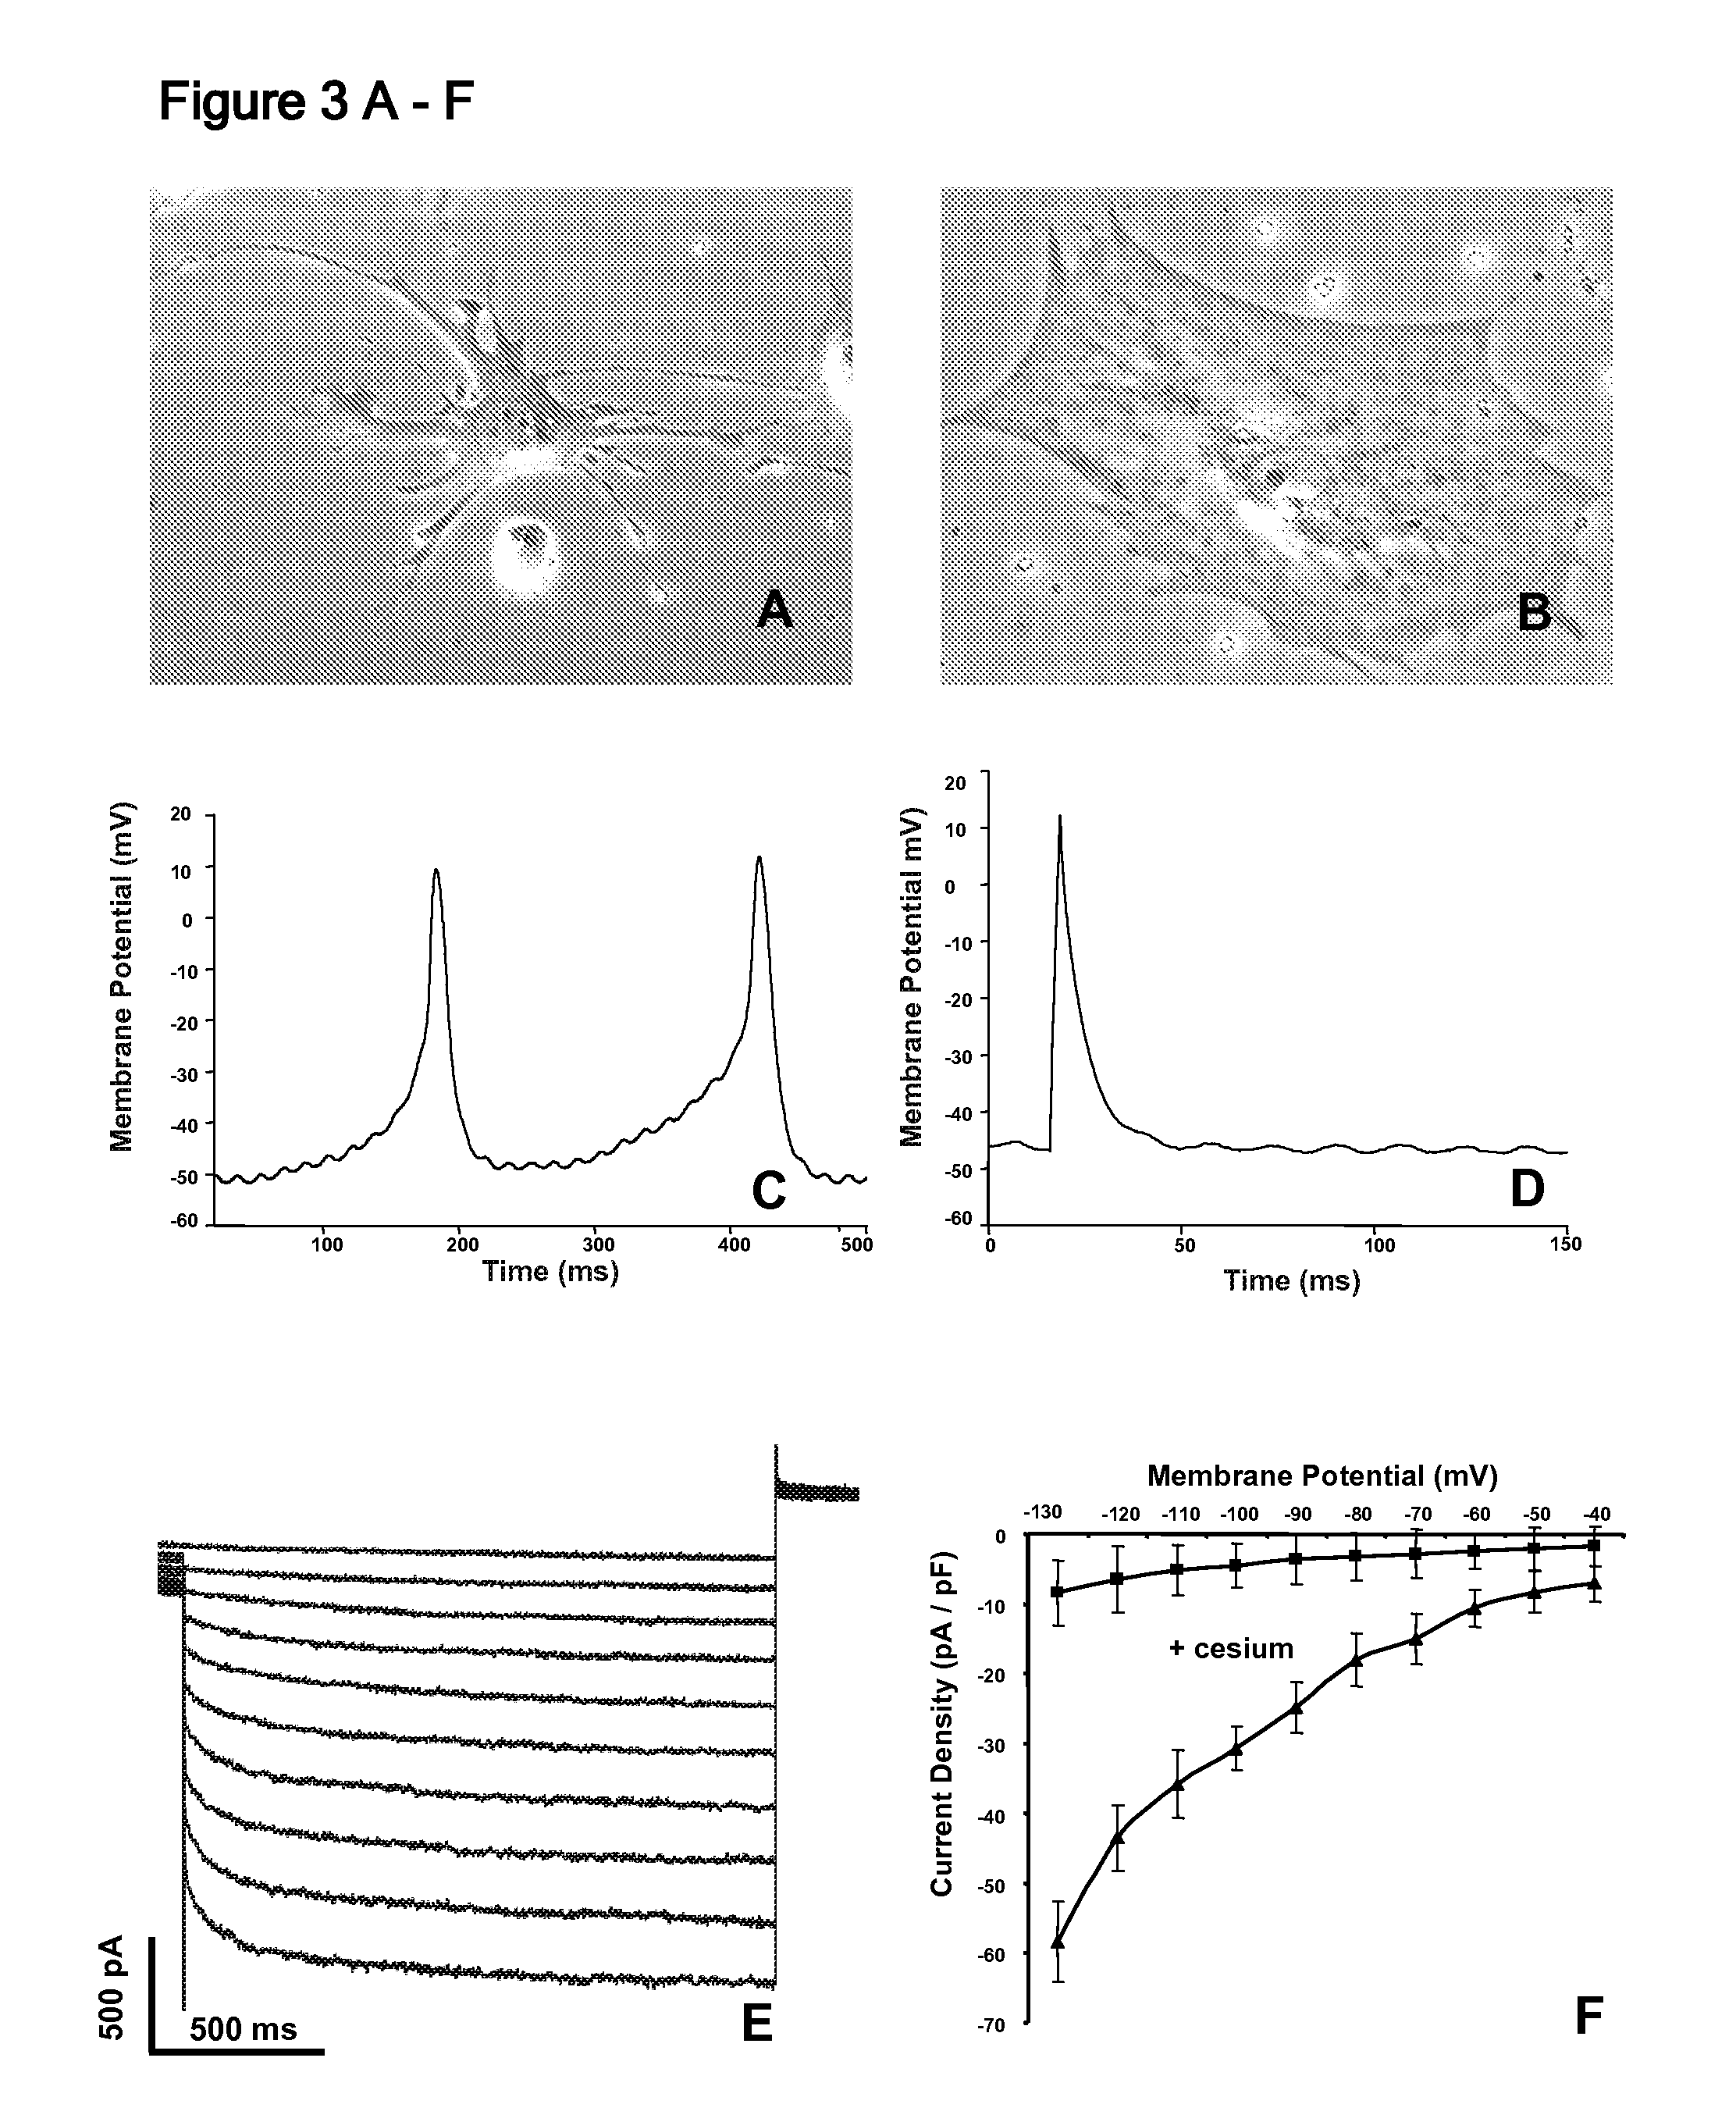 Cardiac Conduction System Cells and Uses Thereof